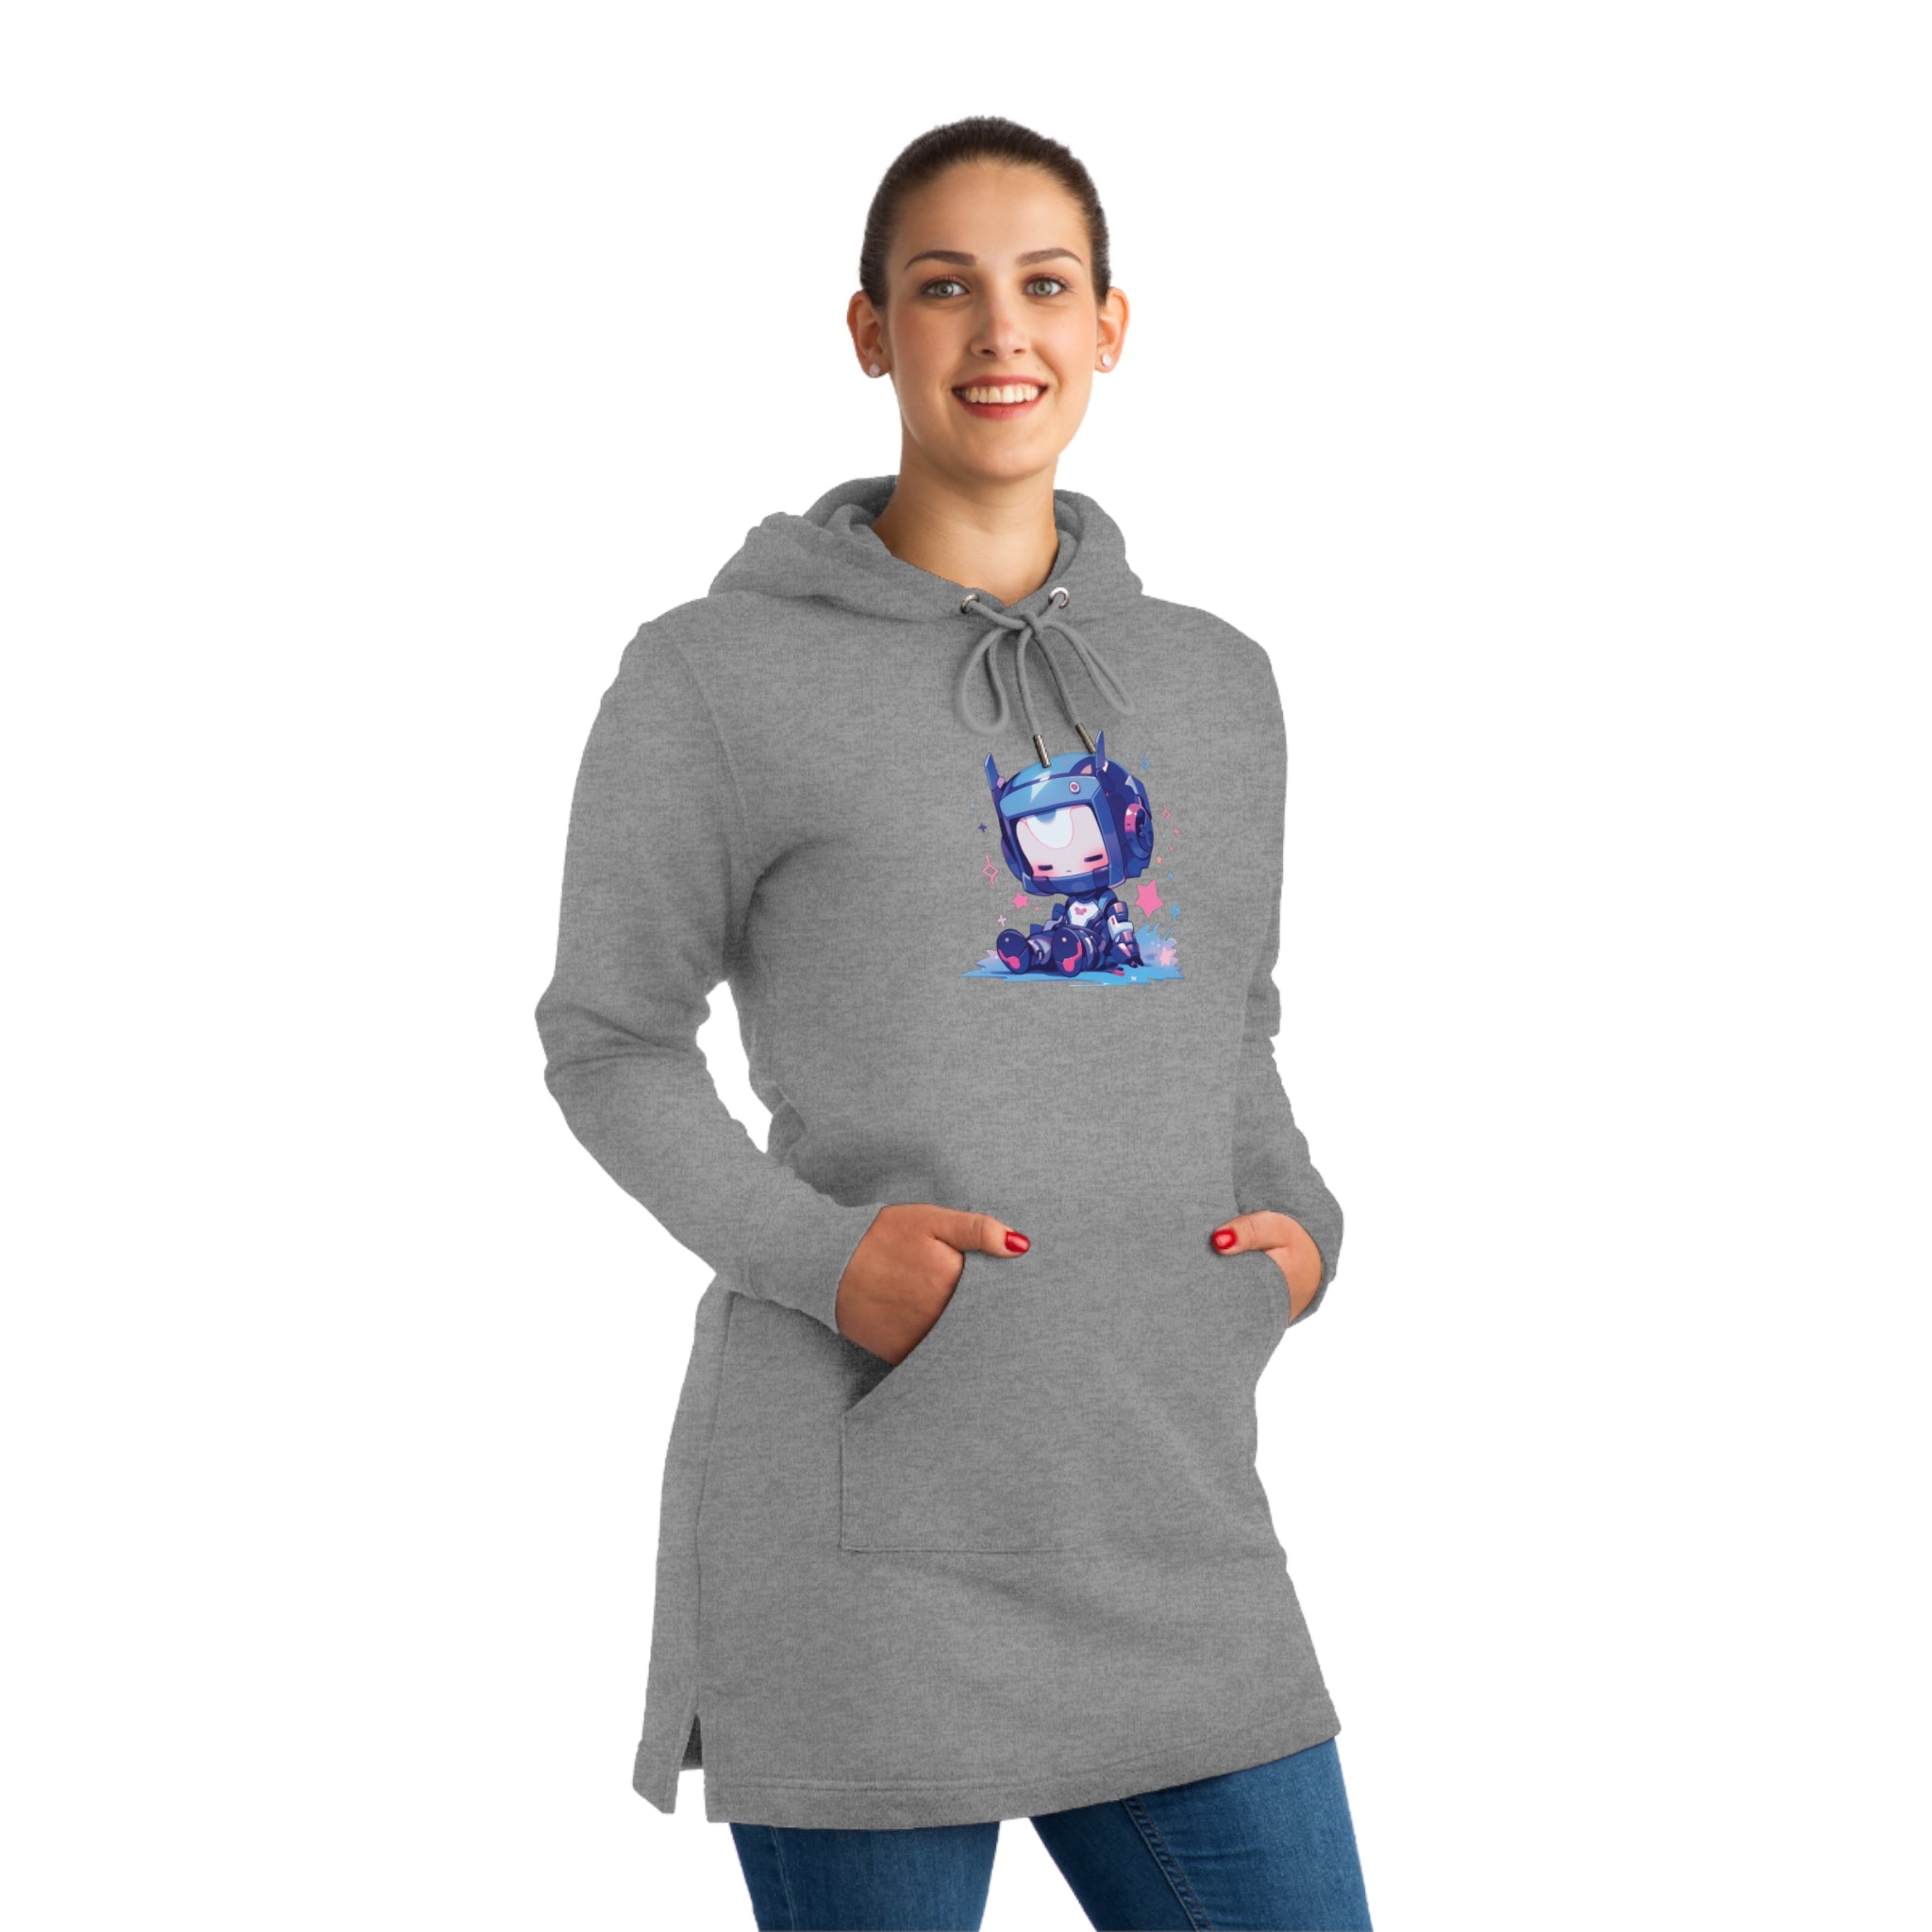 Adorable Robot Themed Hoodie Dress - MiTo Store